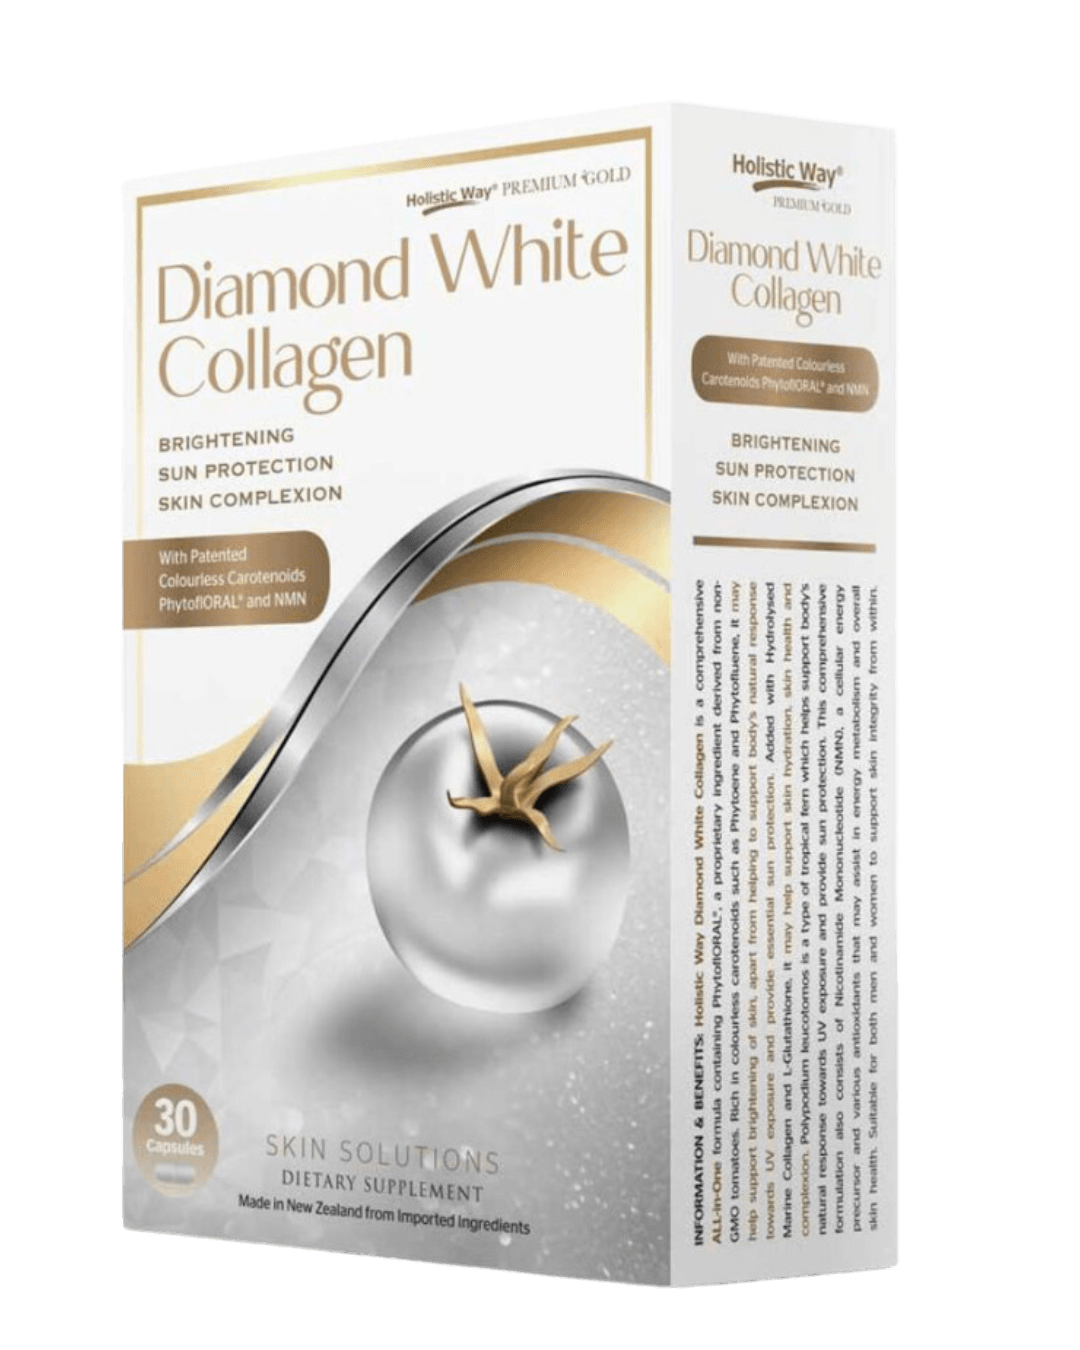 Daily Vanity Beauty Awards 2024 Best Skincare Holistic Way Premium Gold Diamond White Collagen Voted By Beauty Experts